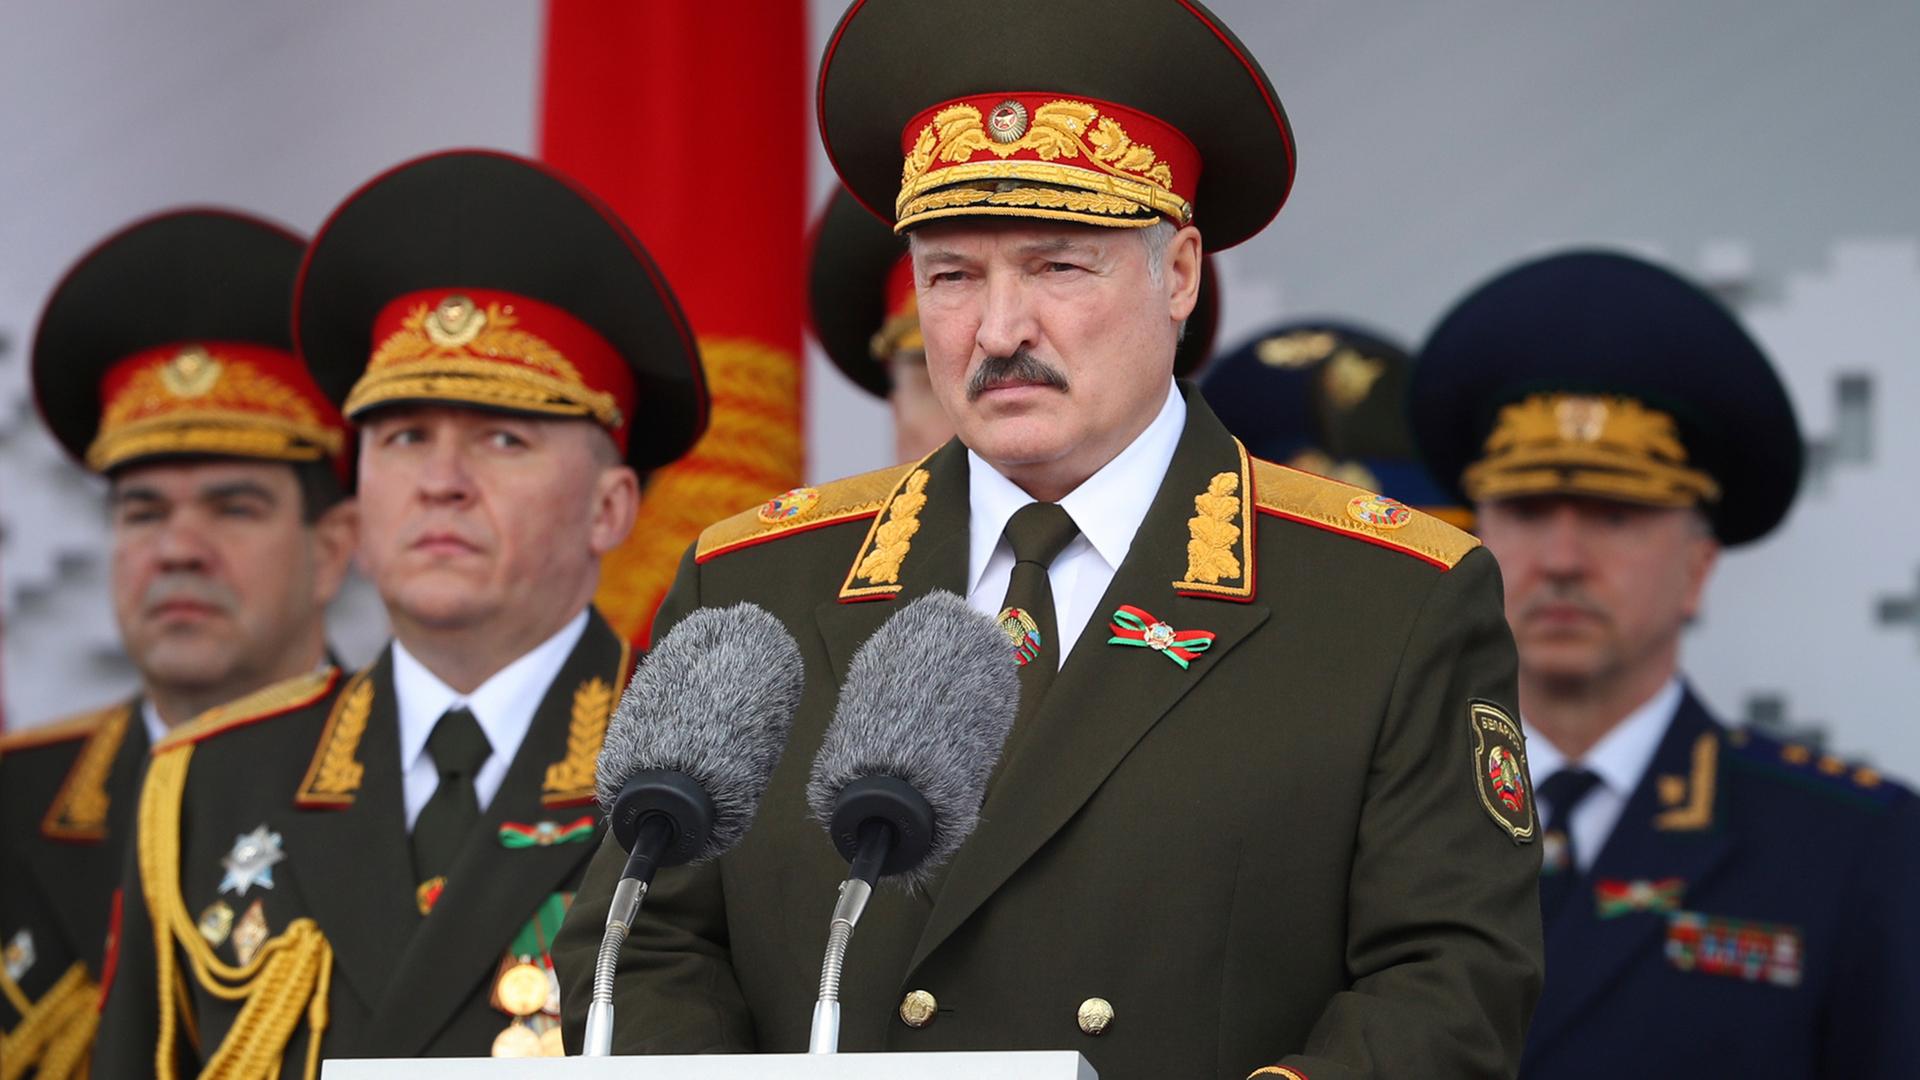 Belarusian President Alexander Lukashenko, center, gives a speech during a military parade that marked the 75th anniversary of the allied victory over Nazi Germany, in Minsk, Belarus, on May 9, 2020.